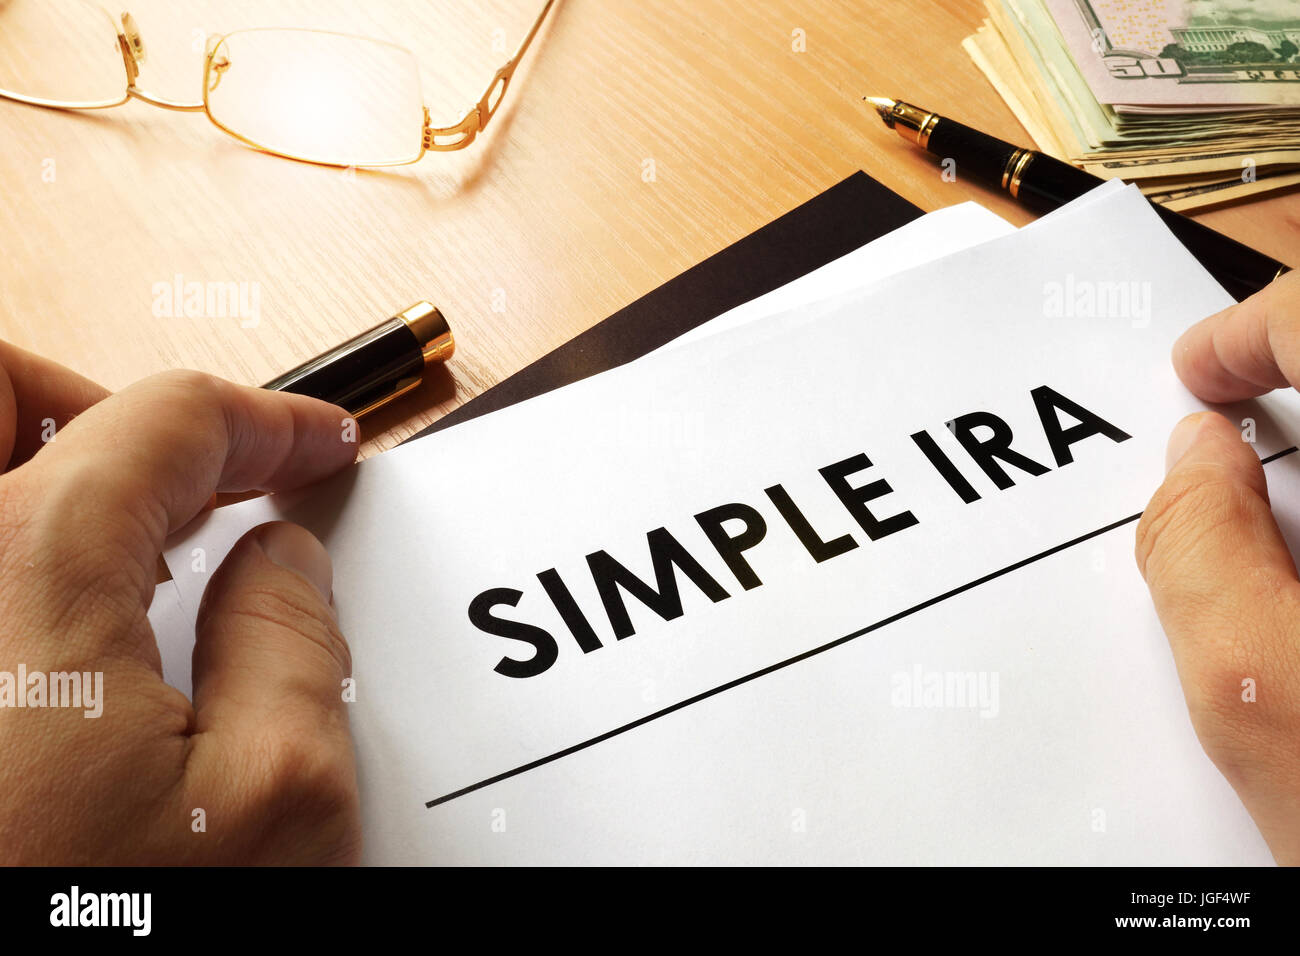 SIMPLE IRA (Savings Incentive Match Plan for Employees) concept. Stock Photo